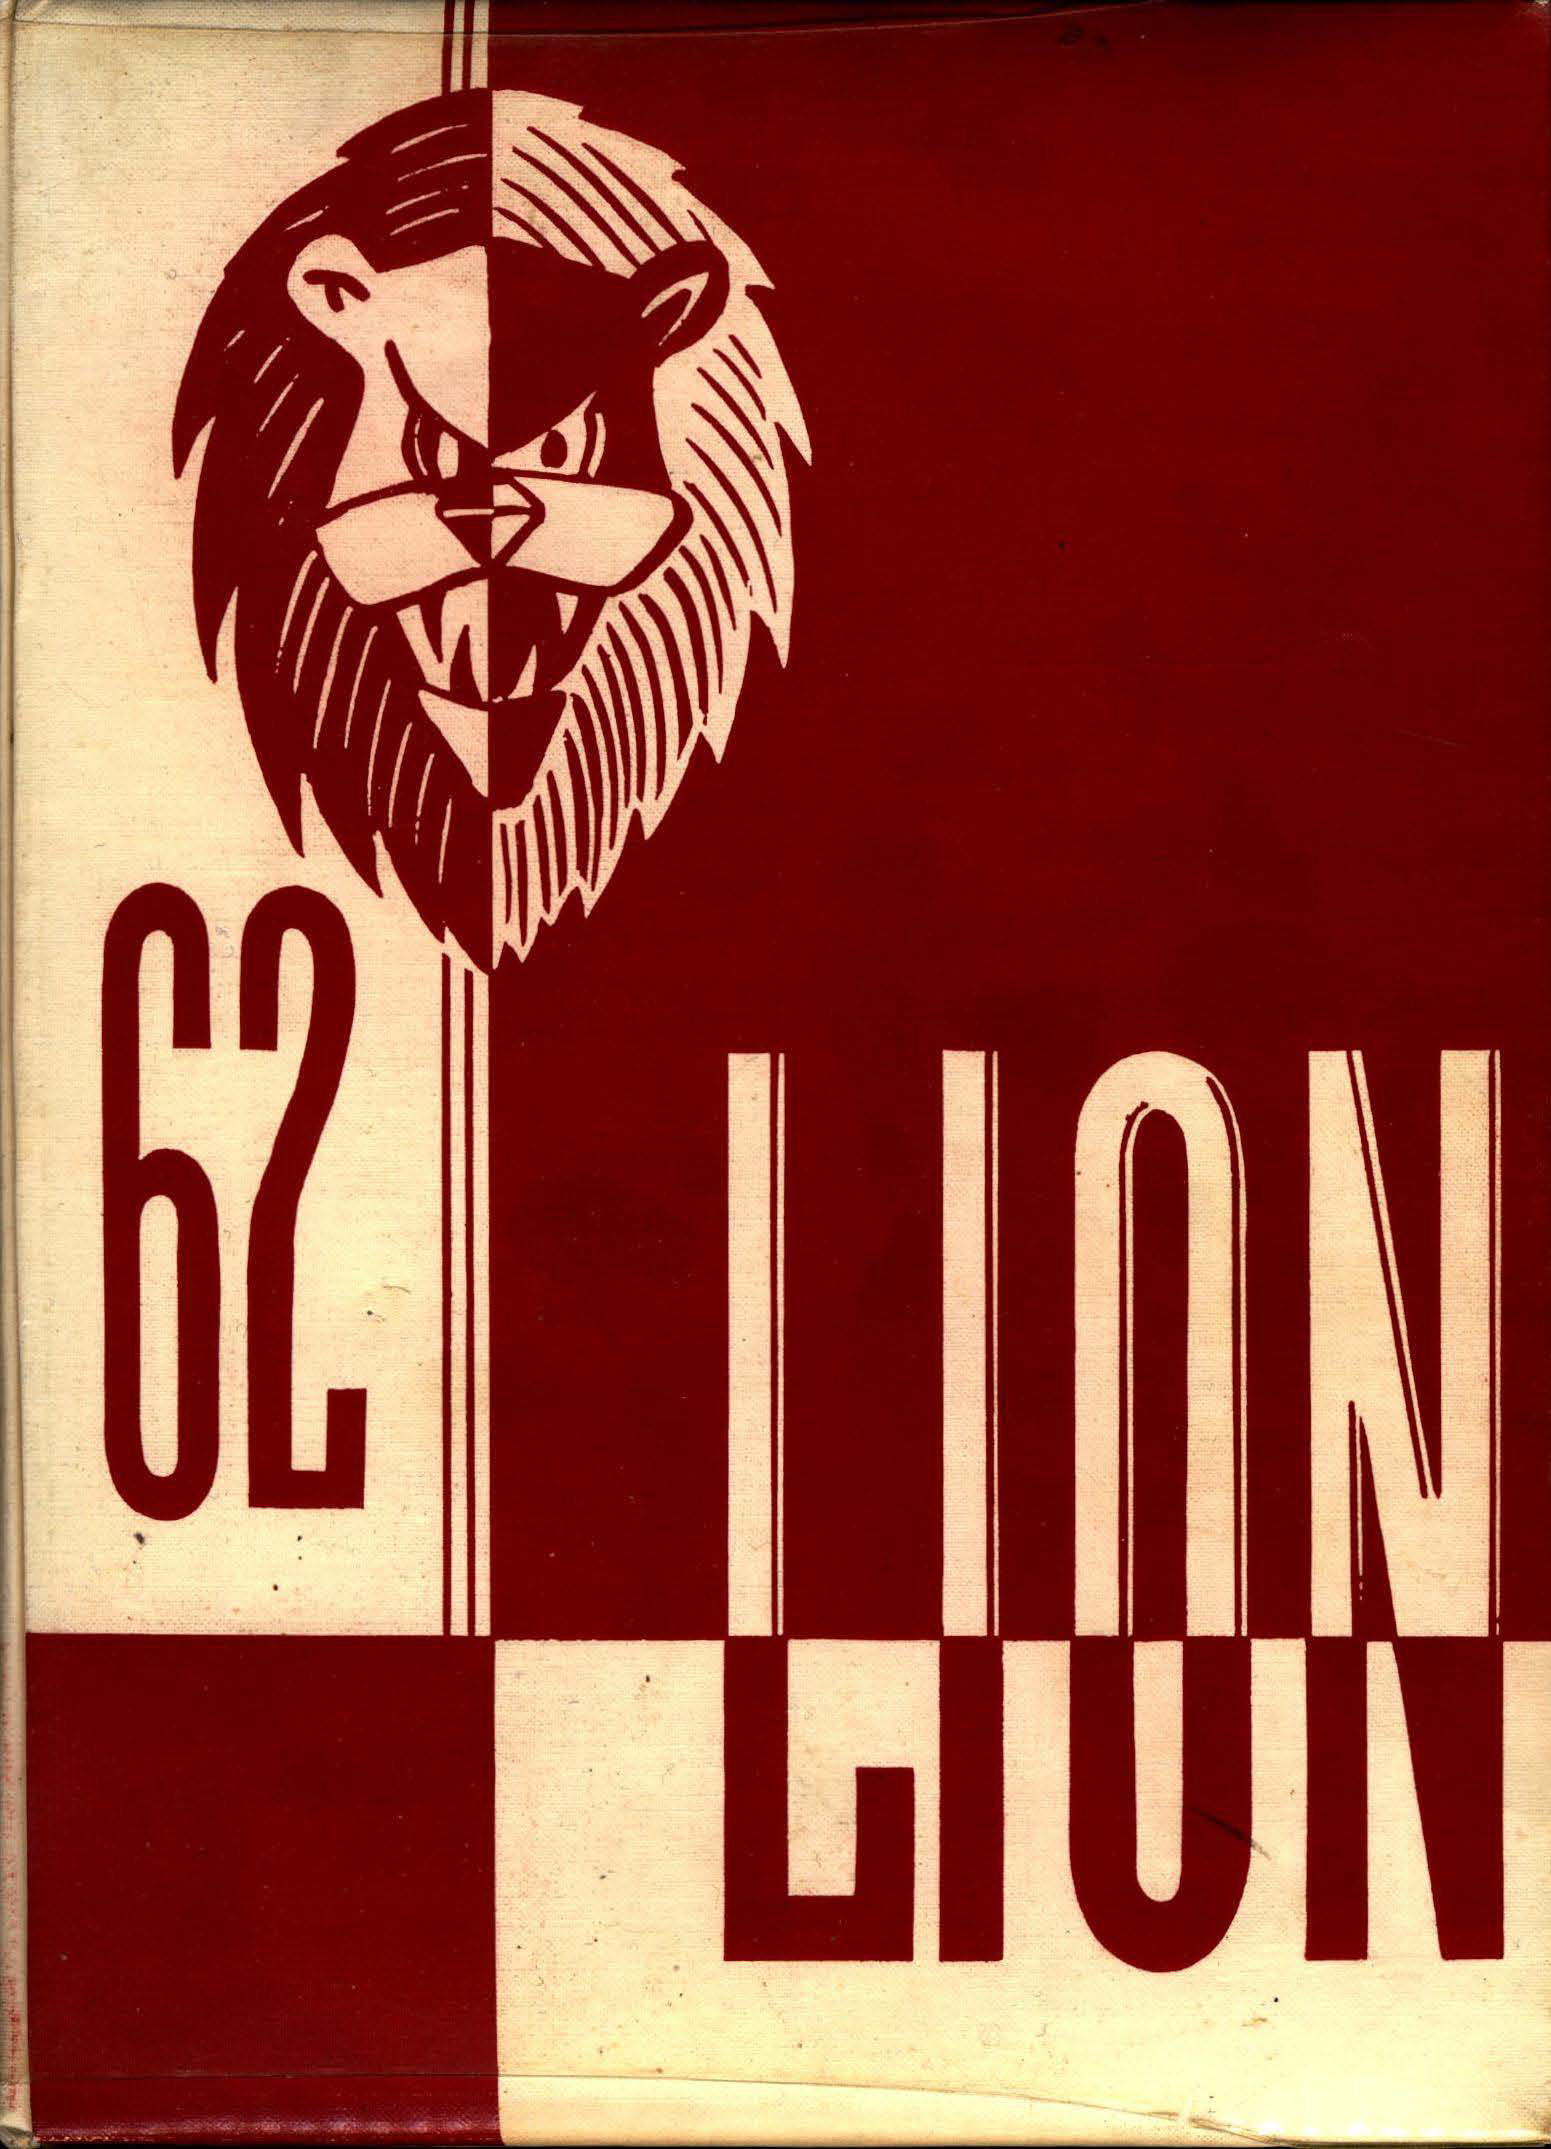 1962 Chelmsford High Yearbook 1